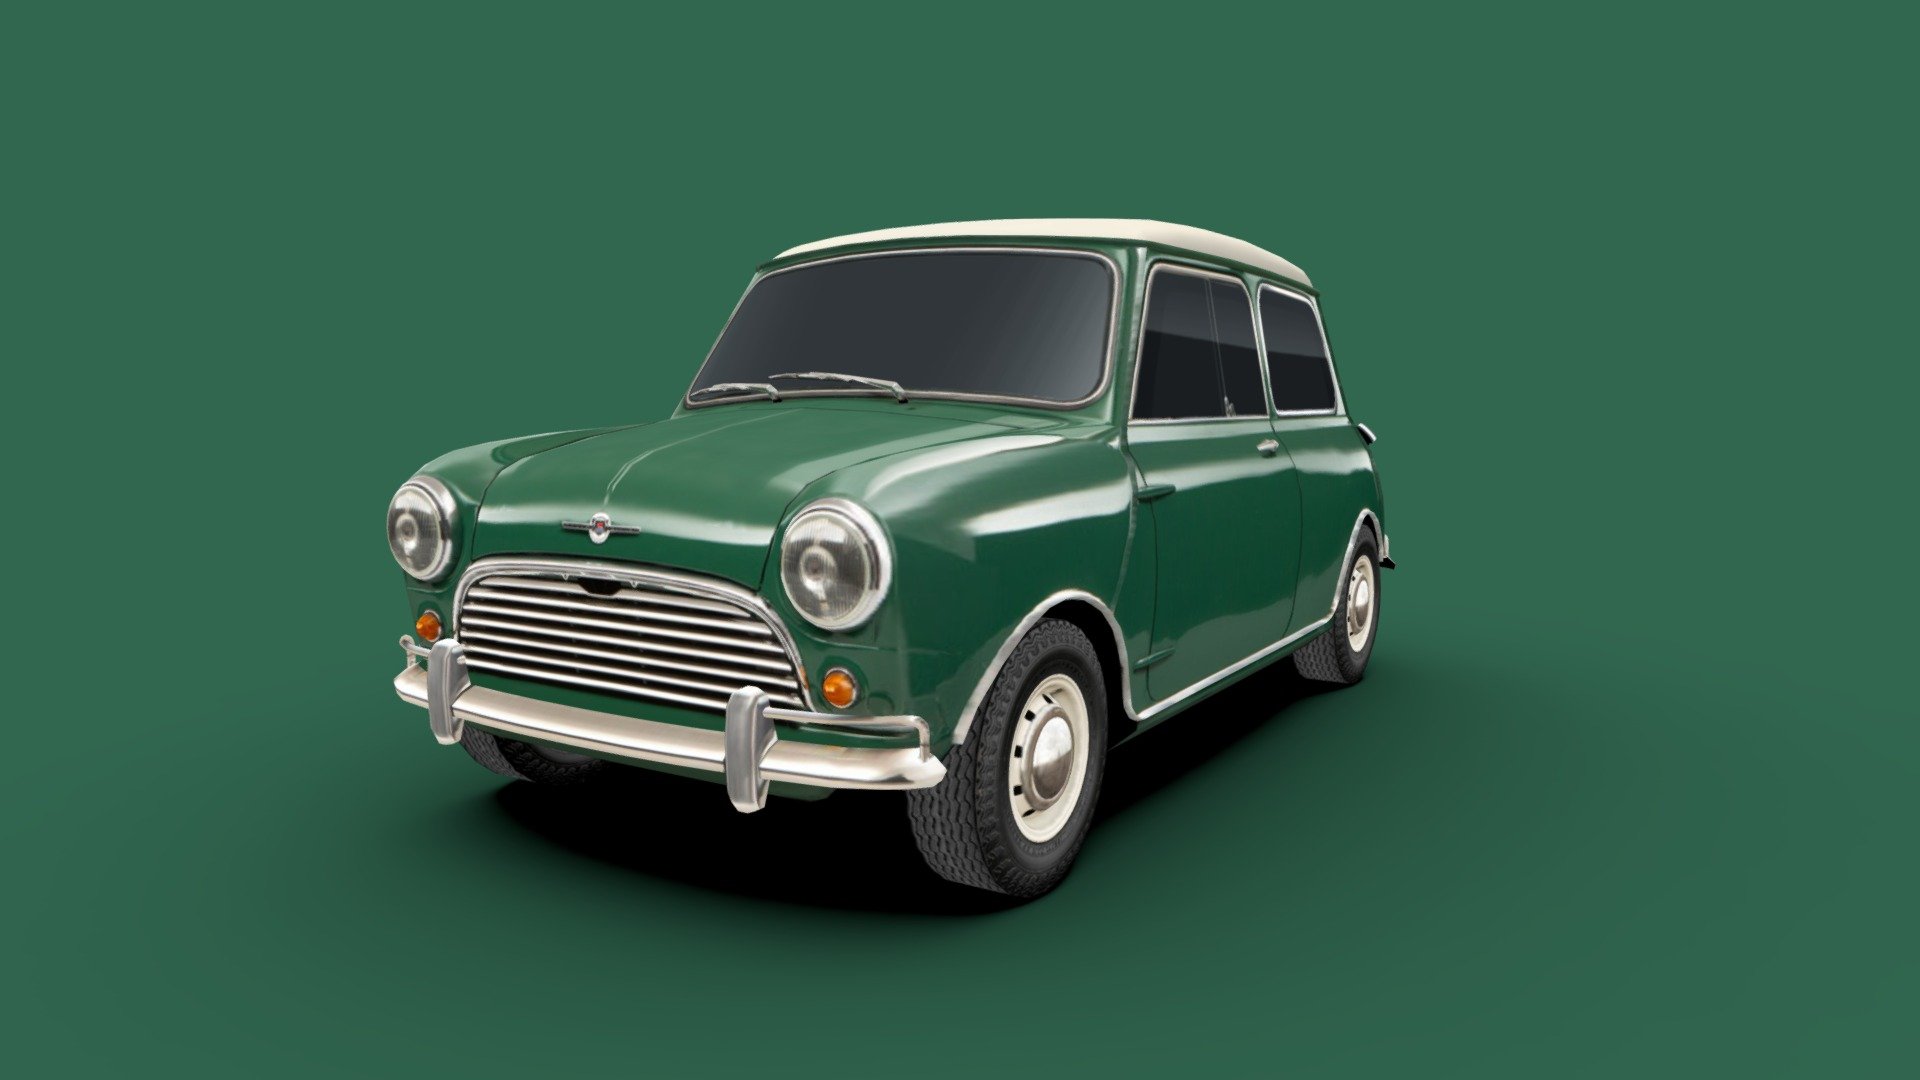 3d model of the Mark I Morris Mini Cooper, a 2-door saloon city car.

The model is very low-poly, full-scale, real photos texture (single 2048 x 2048 png).

Package includes 5 file formats and texture (3ds, fbx, dae, obj and skp)

Hope you enjoy it.

José Bronze - Morris Mini Cooper Mark I - Buy Royalty Free 3D model by Jose Bronze (@pinceladas3d) 3d model